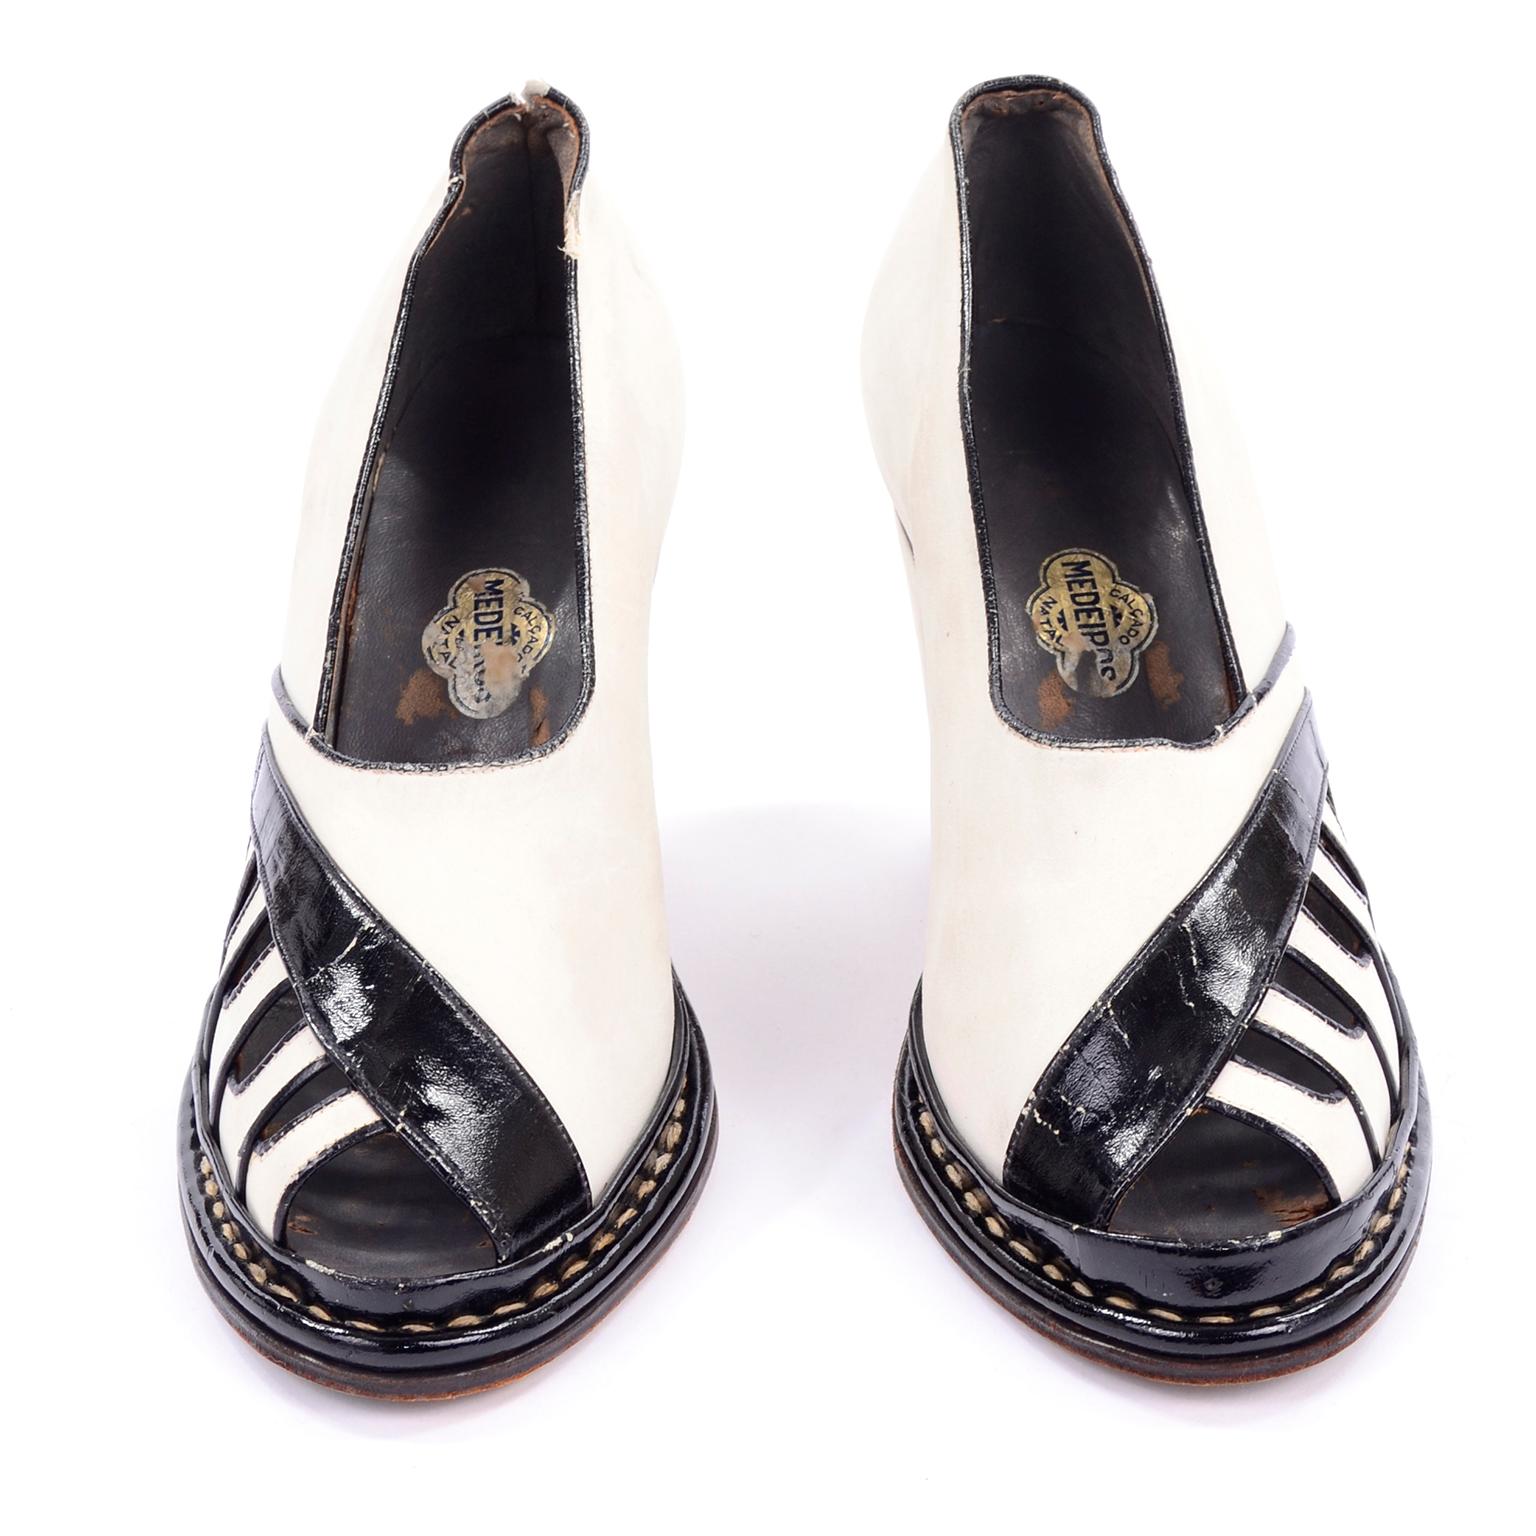 Brazilian Leather 1940s Novelty Peep Toe Platform Heels Piano Key Vintage Shoes In Good Condition For Sale In Portland, OR